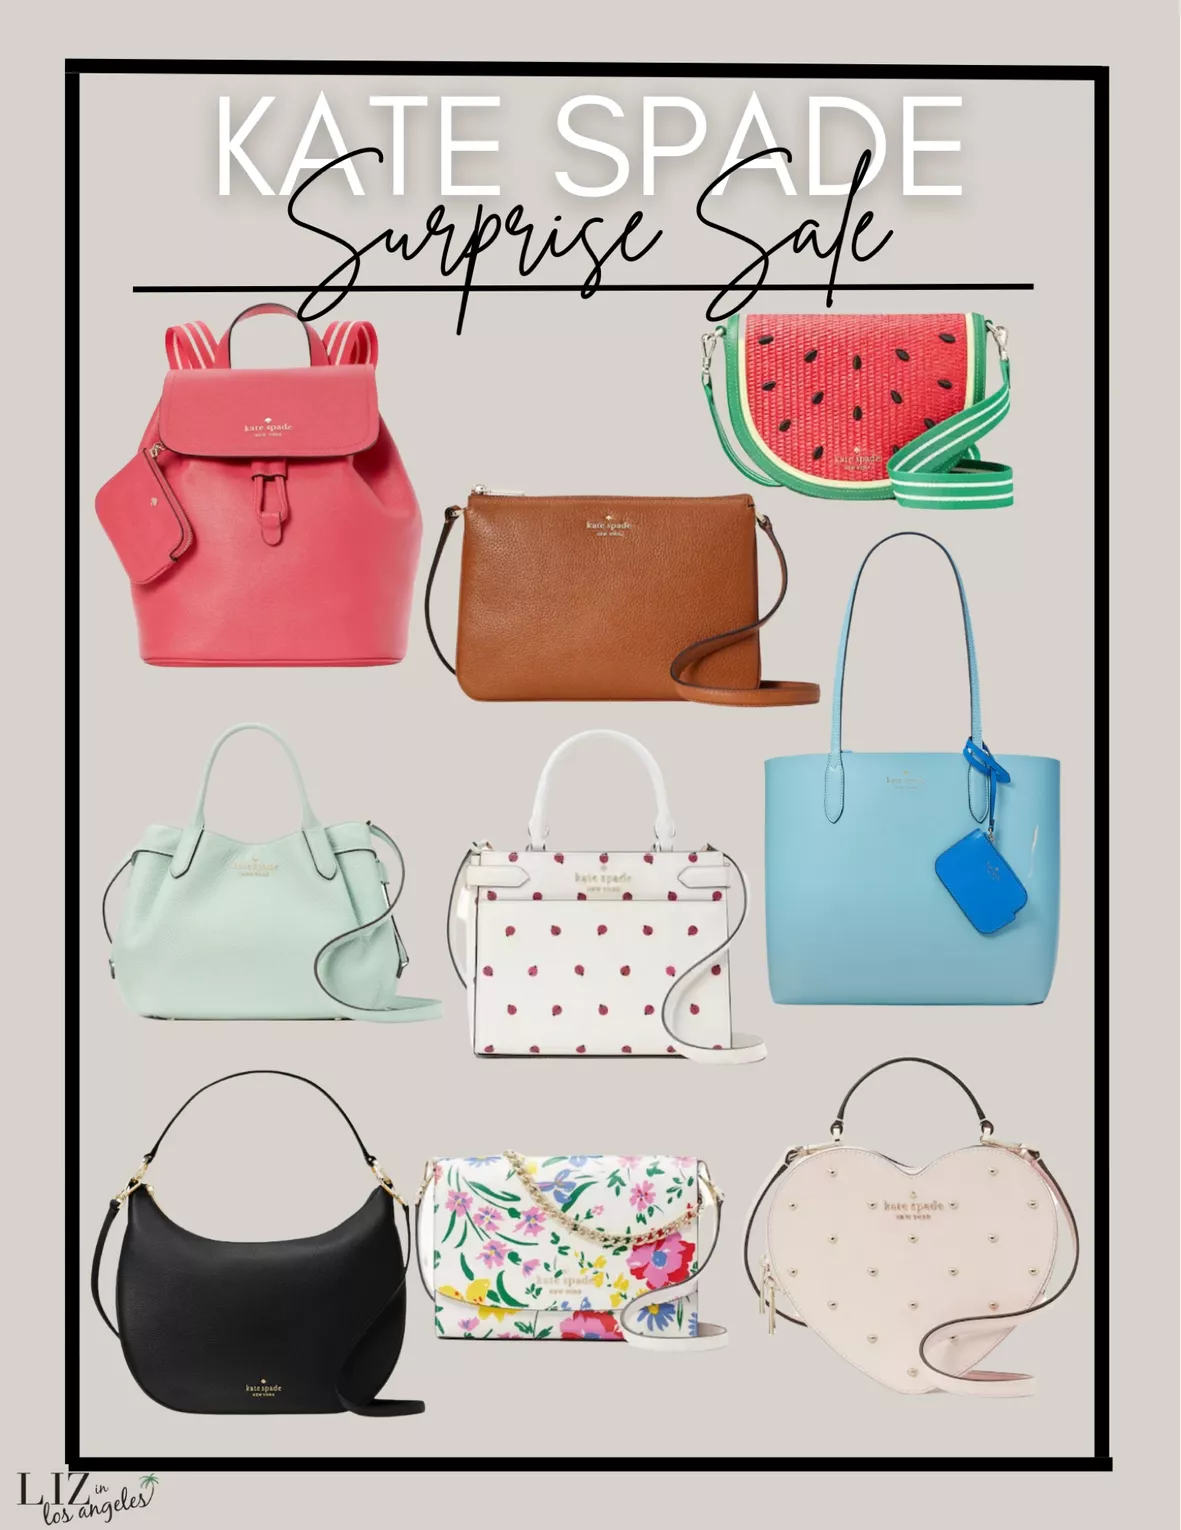 Where to Get a Great Deal On a Kate Spade Bag for Spring - The